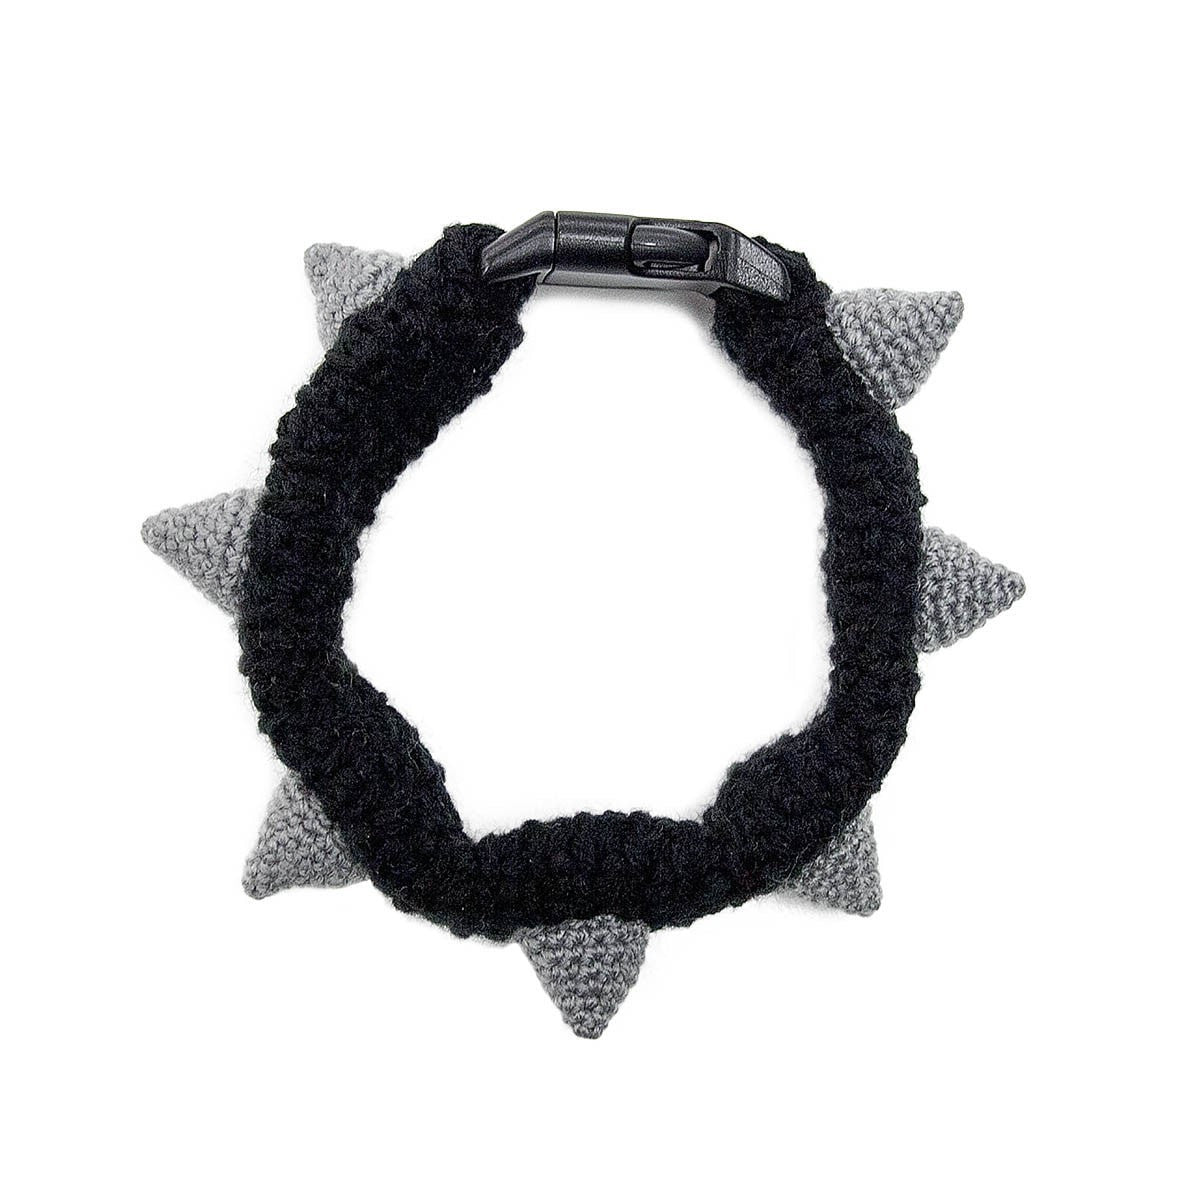 Dog Snood Costume Crochet Spiked Collar top view